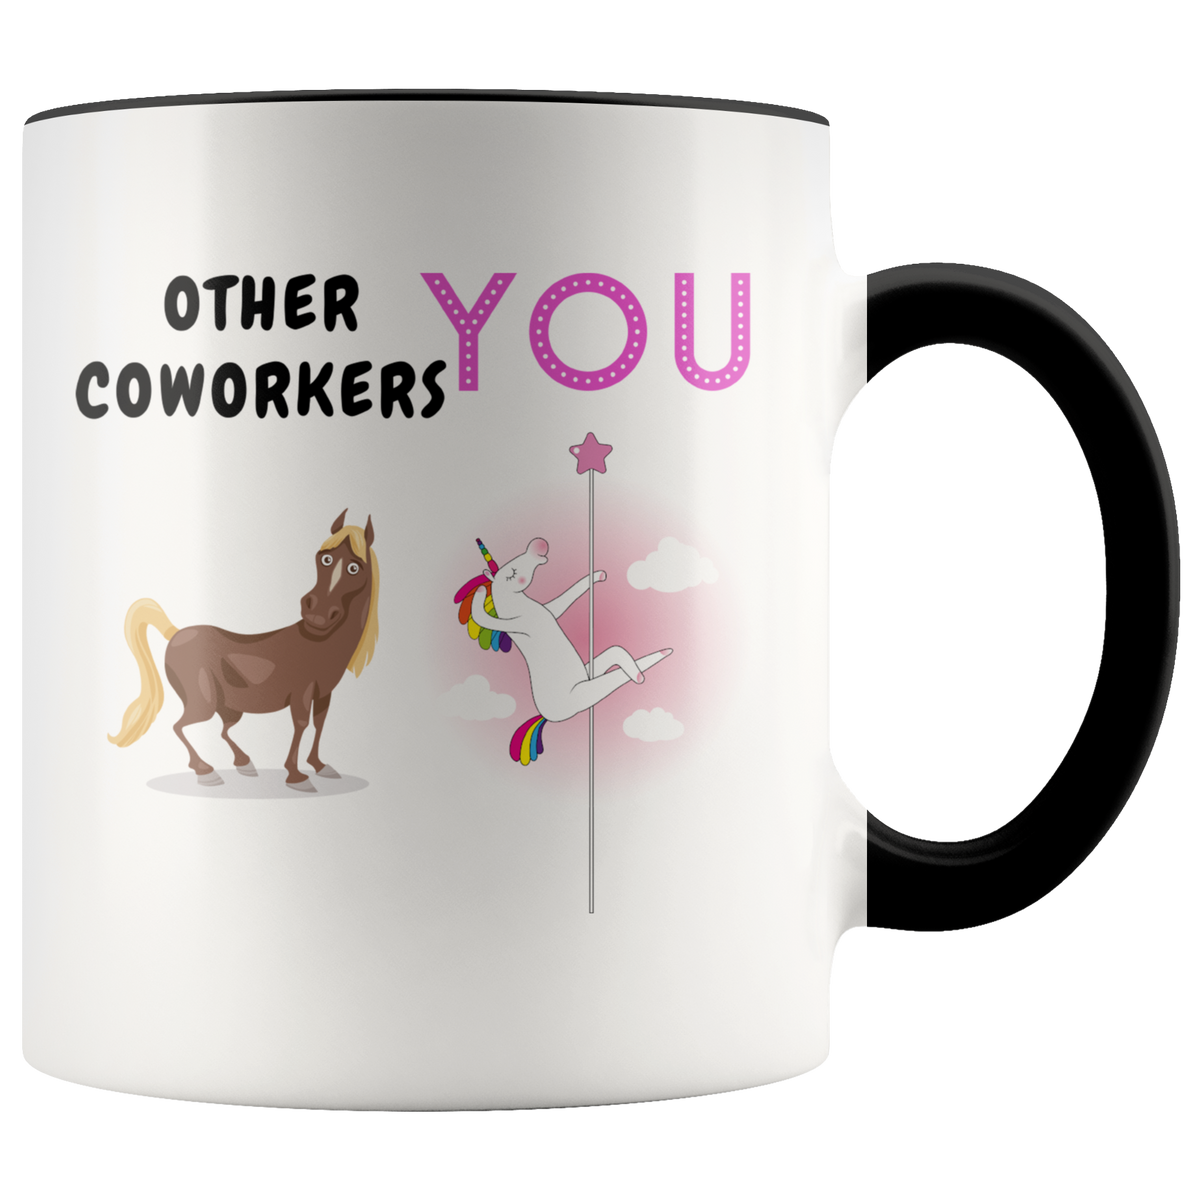 Funny Coworker Mug Gift - Other Coworkers and You Accent Coffee Mug 11oz